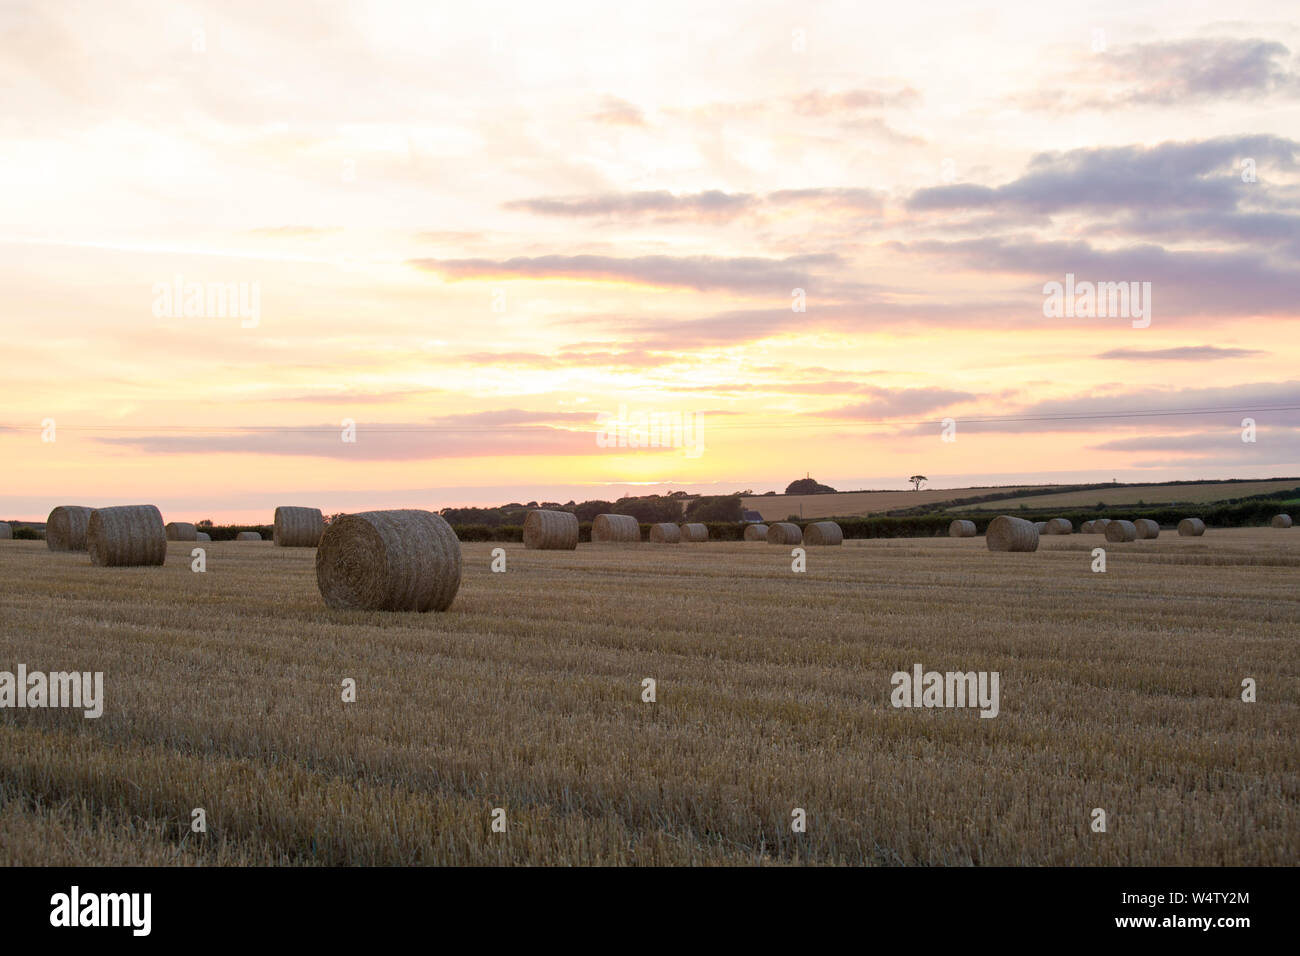 Sunset Over a Field of Recently Cut Straw With Round Straw Bales in the Stubble Field Stock Photo